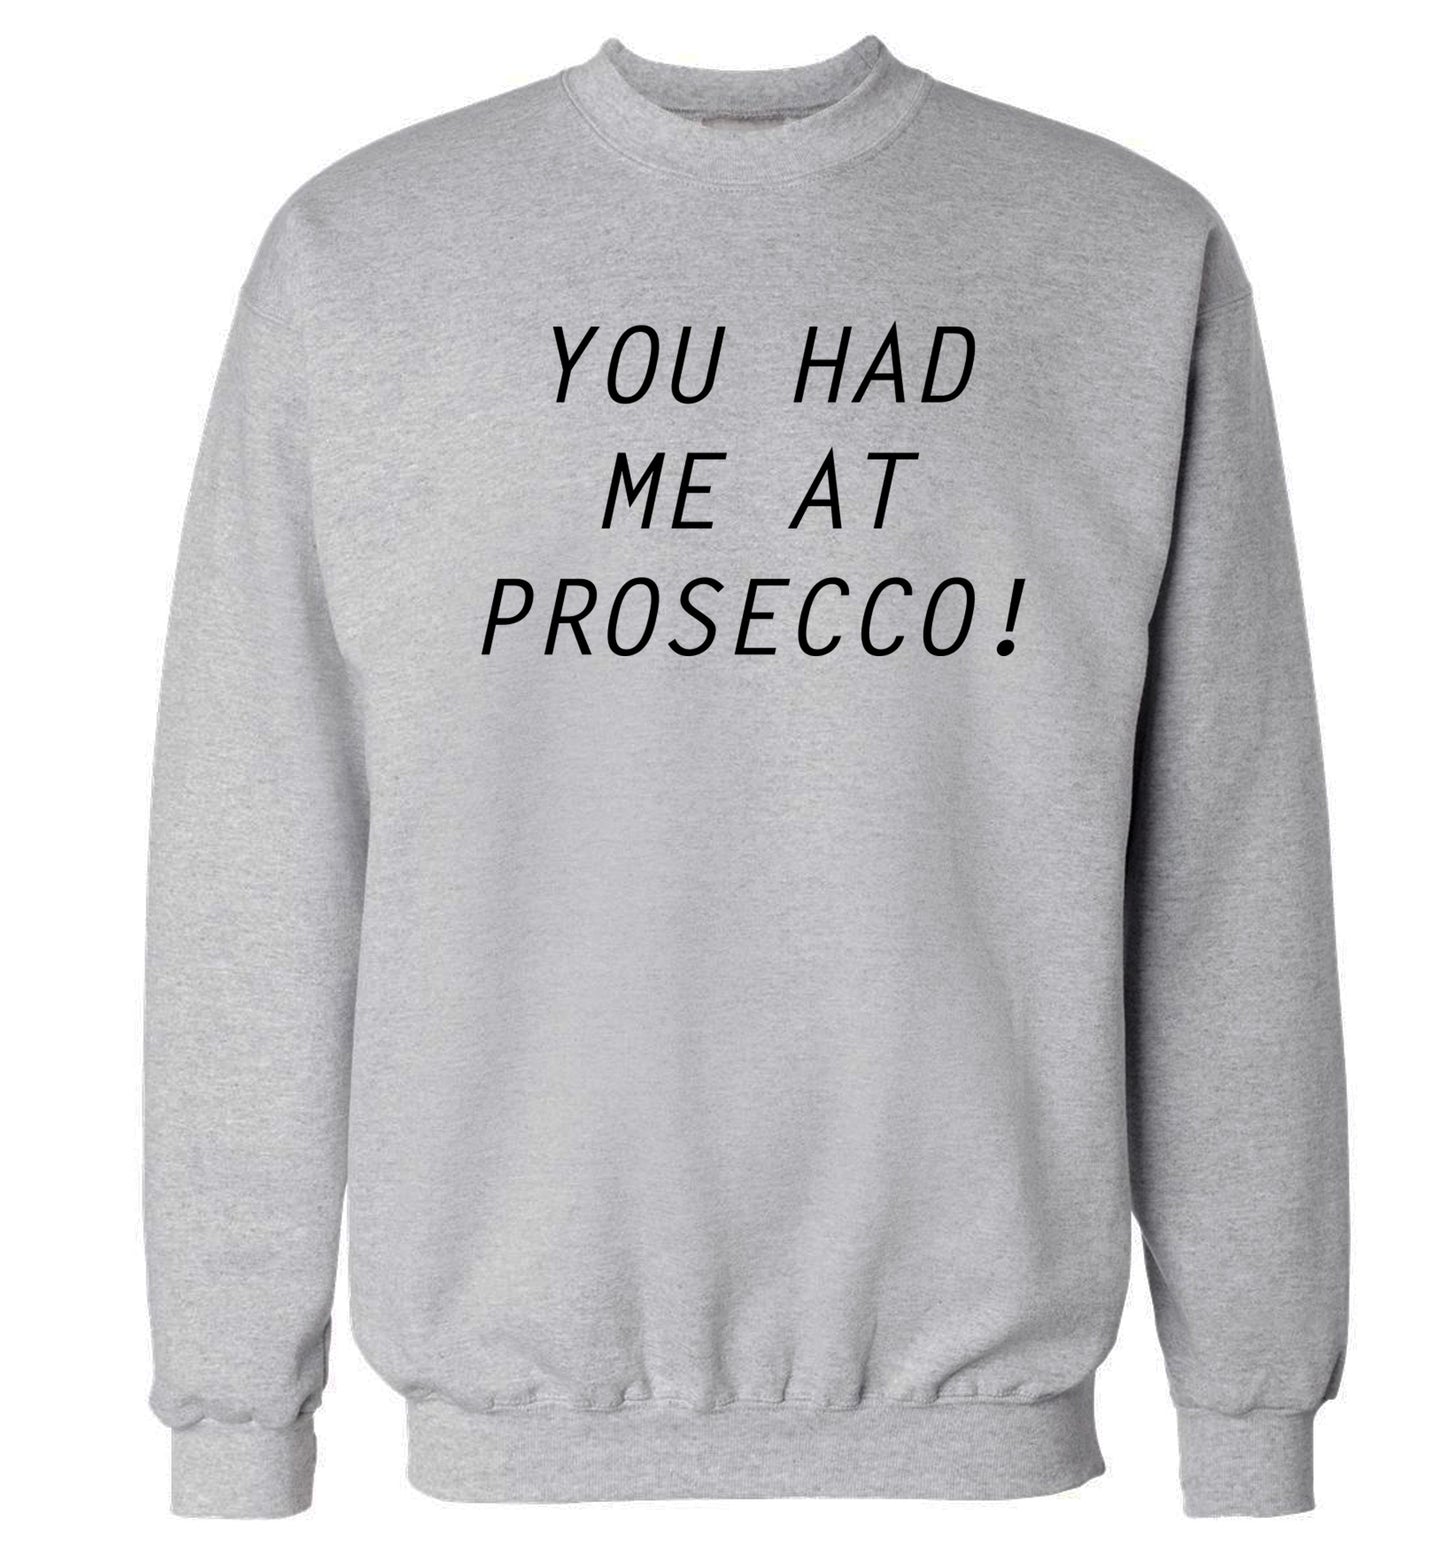 You had me at prosecco Adult's unisex grey Sweater 2XL